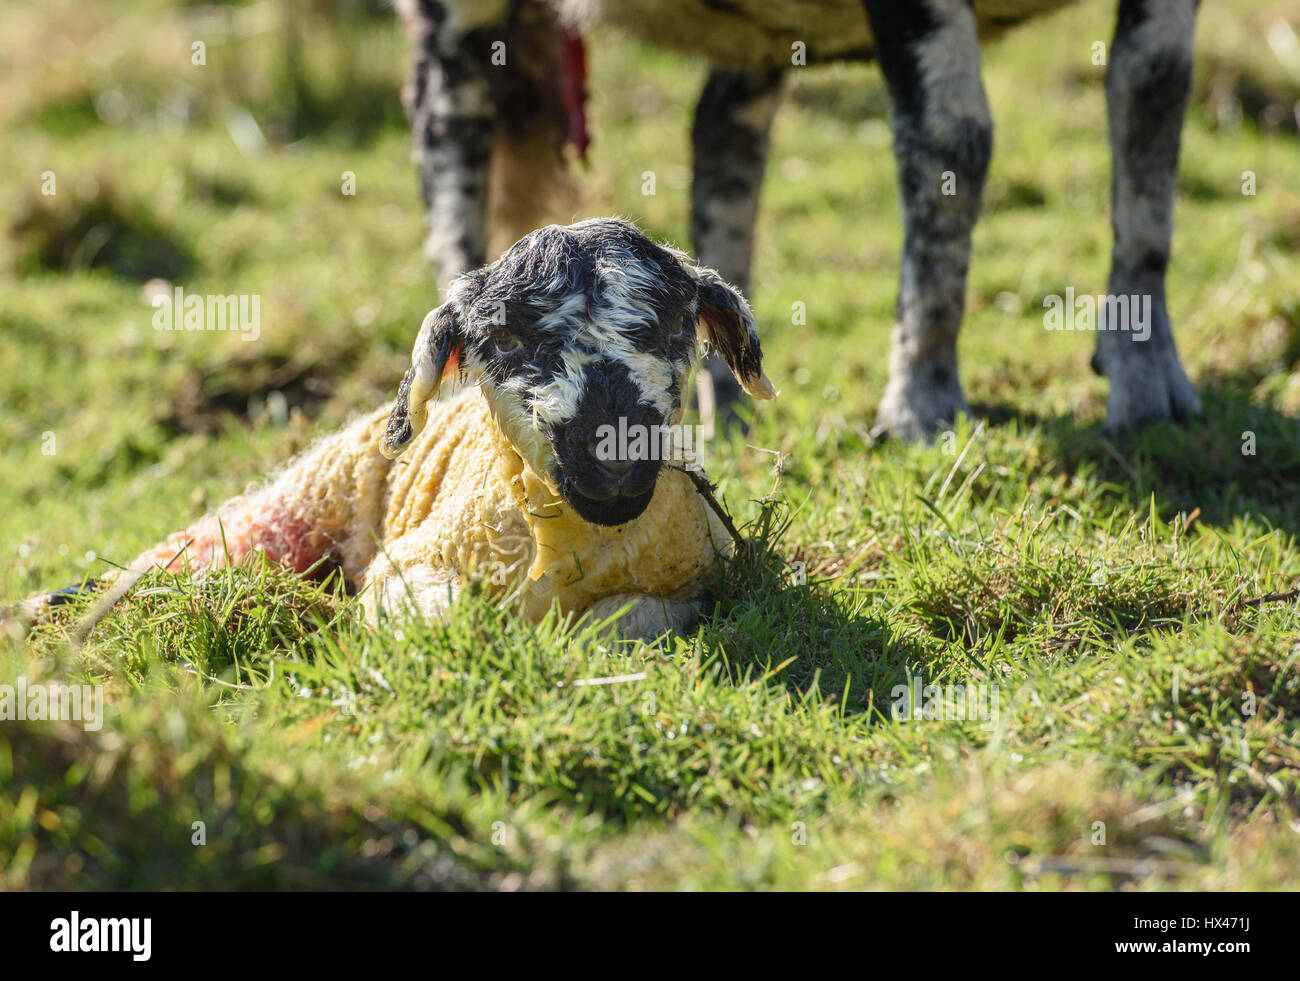 Chipping, Preston, Lancashire, UK. 24th March 2017. A lamb chose a good day to arrive at Saddle End Farm, Chipping, Preston, Lancashire. Credit: John Eveson/Alamy Live News Stock Photo